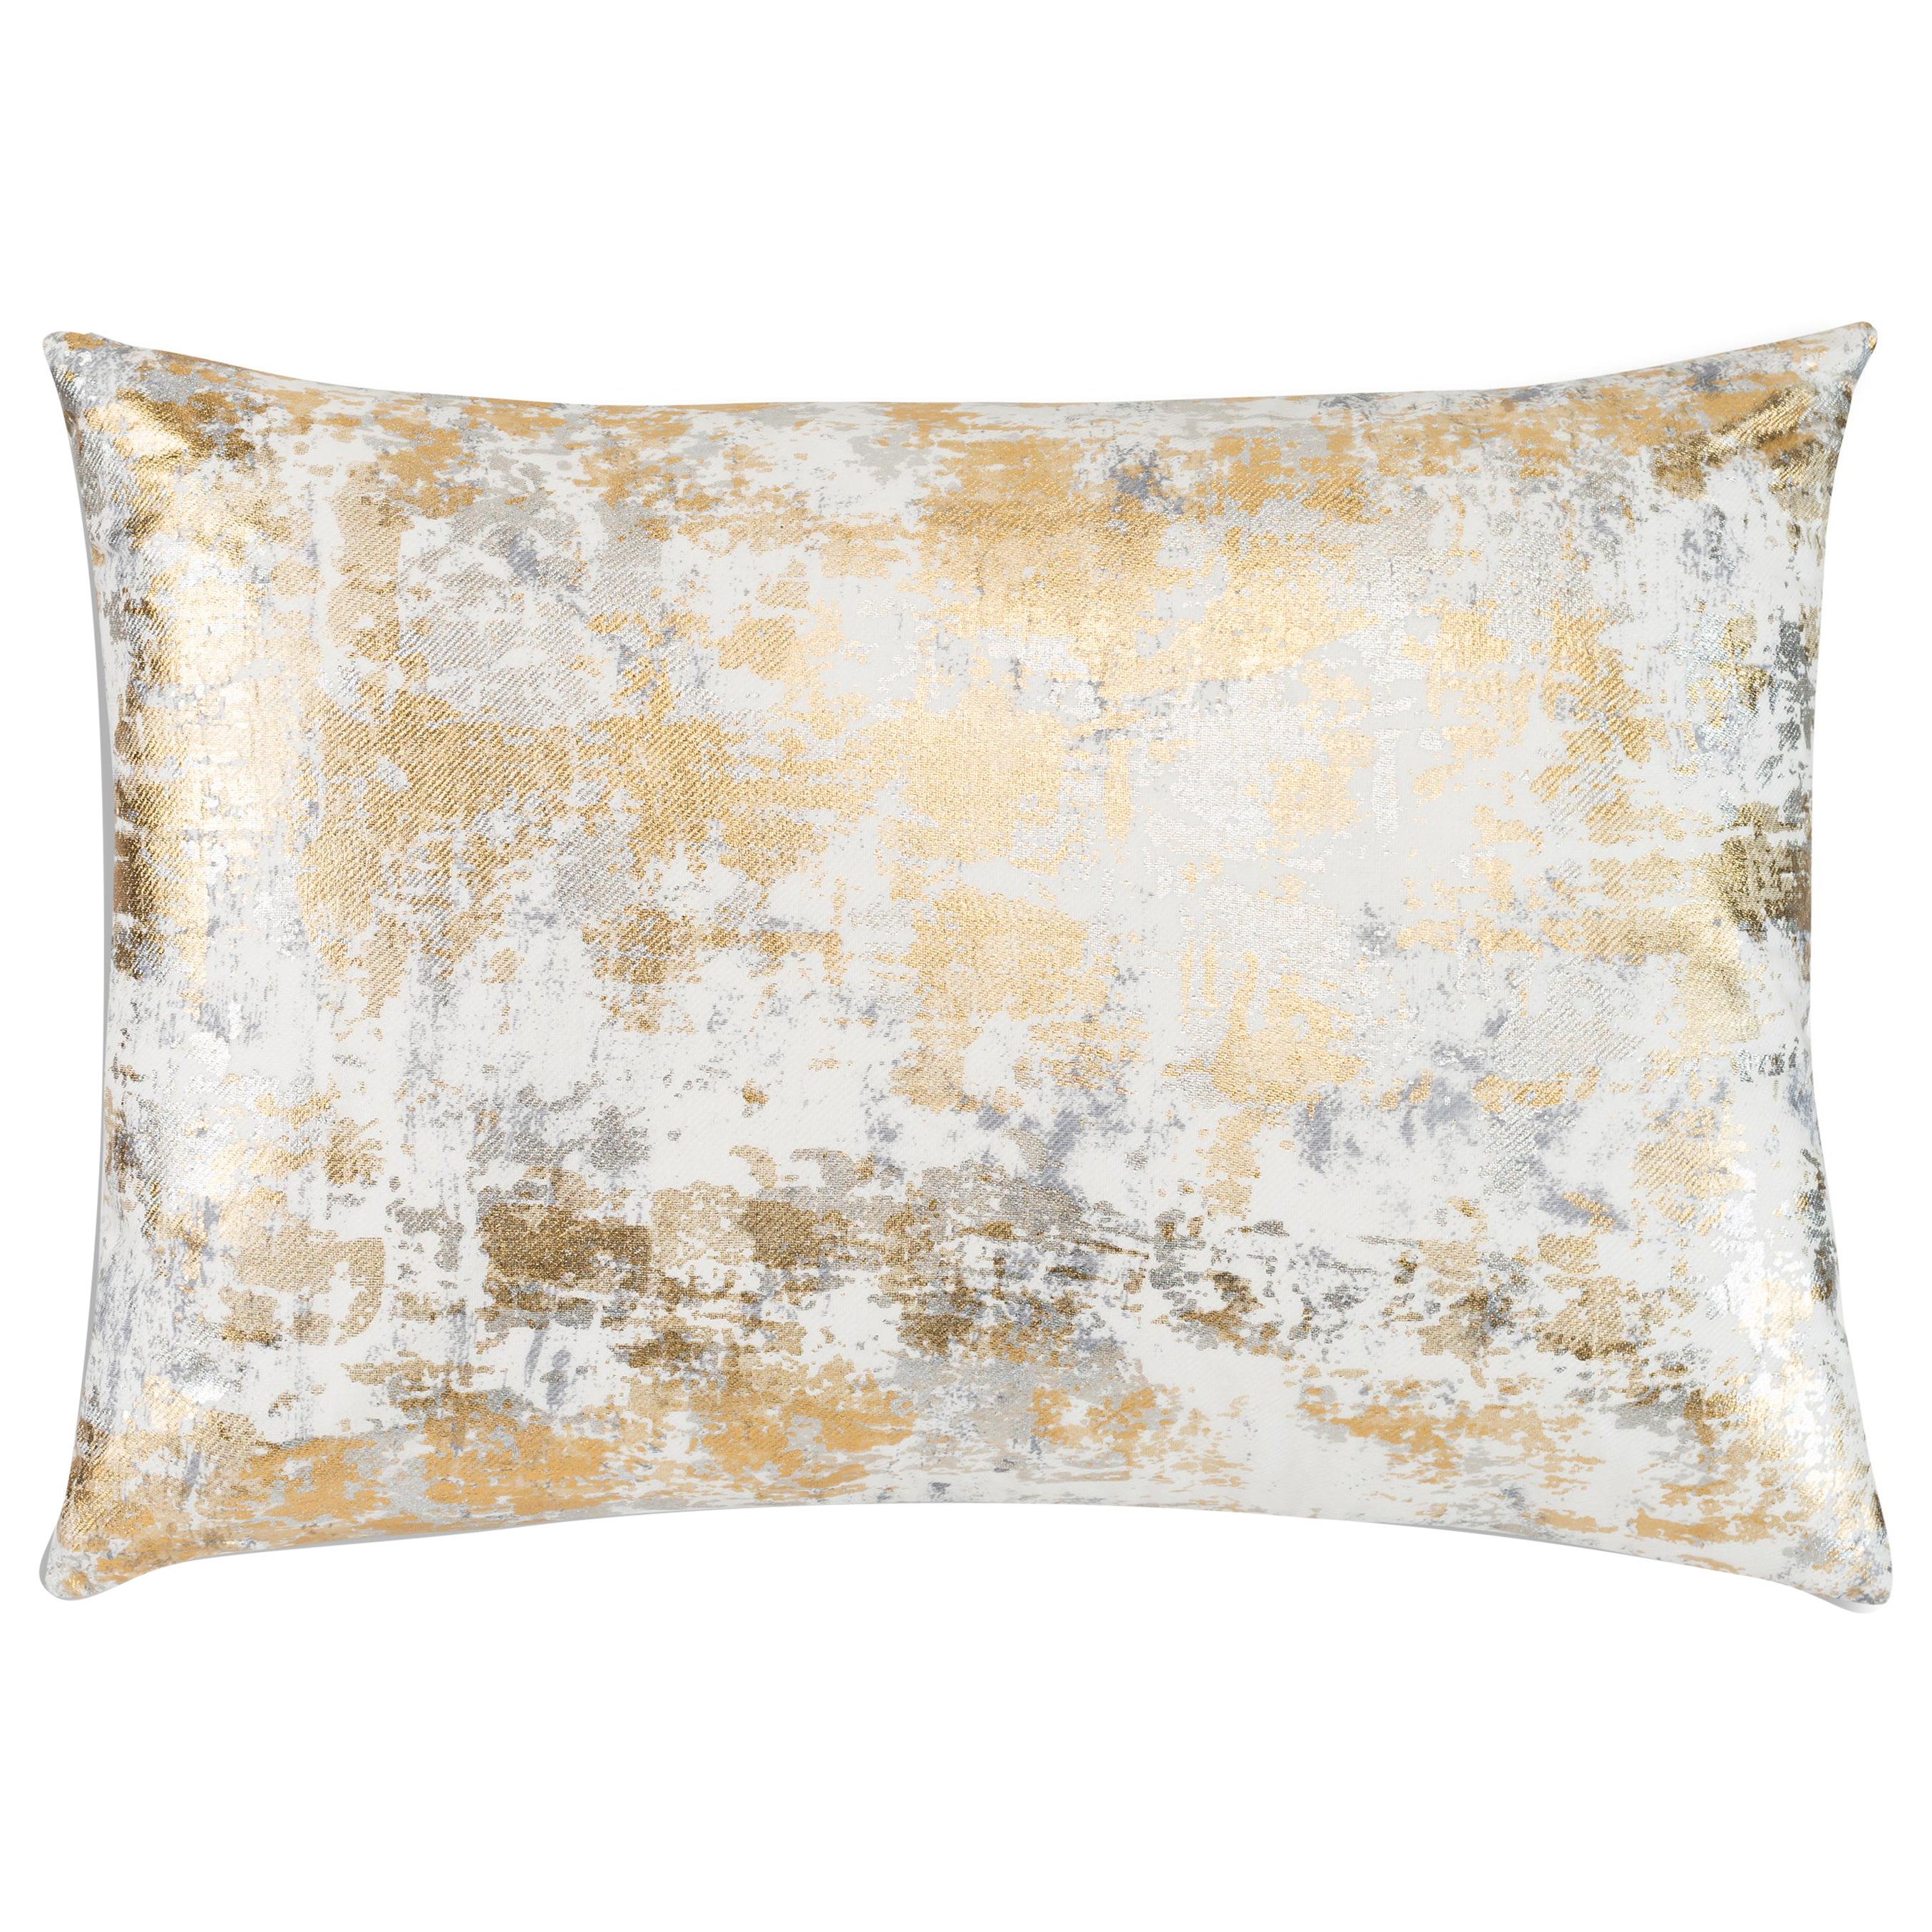 Sona Lumber Pillow, Gold Silver For Sale